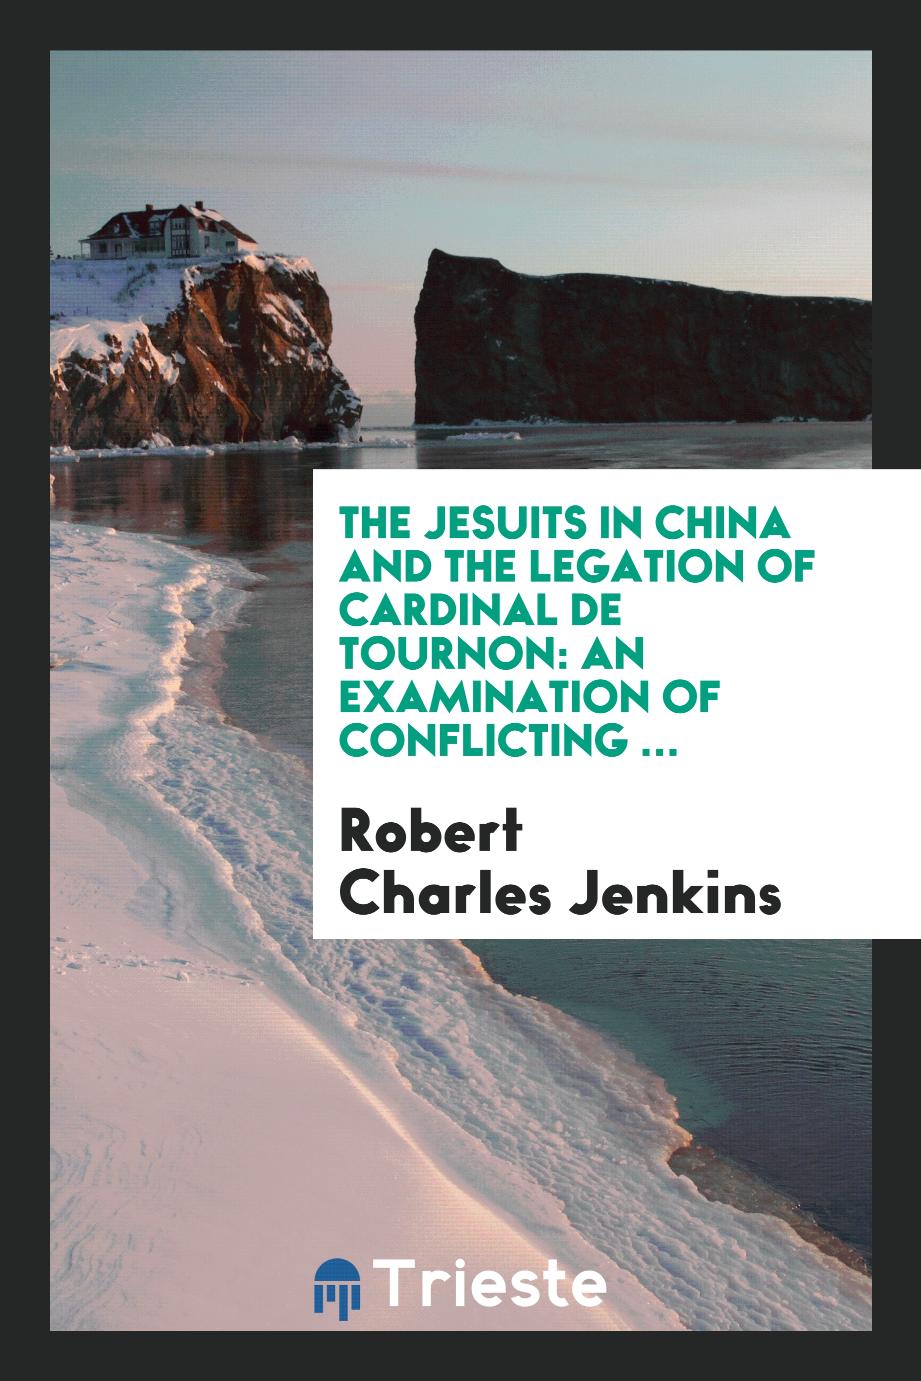 The Jesuits in China and the Legation of Cardinal de Tournon: An Examination of Conflicting ...